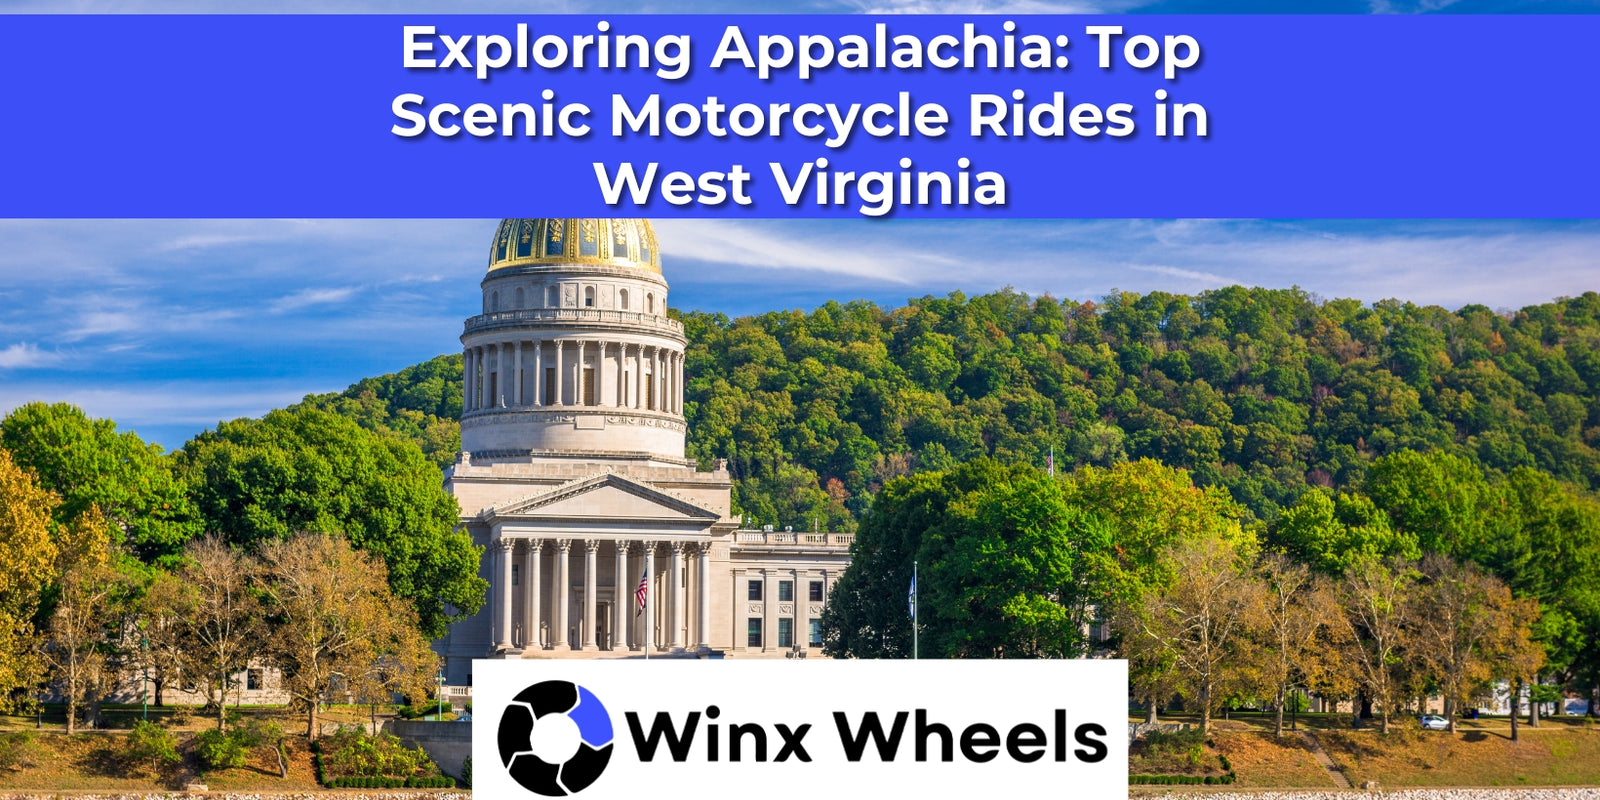 Exploring Appalachia Top Scenic Motorcycle Rides in West Virginia